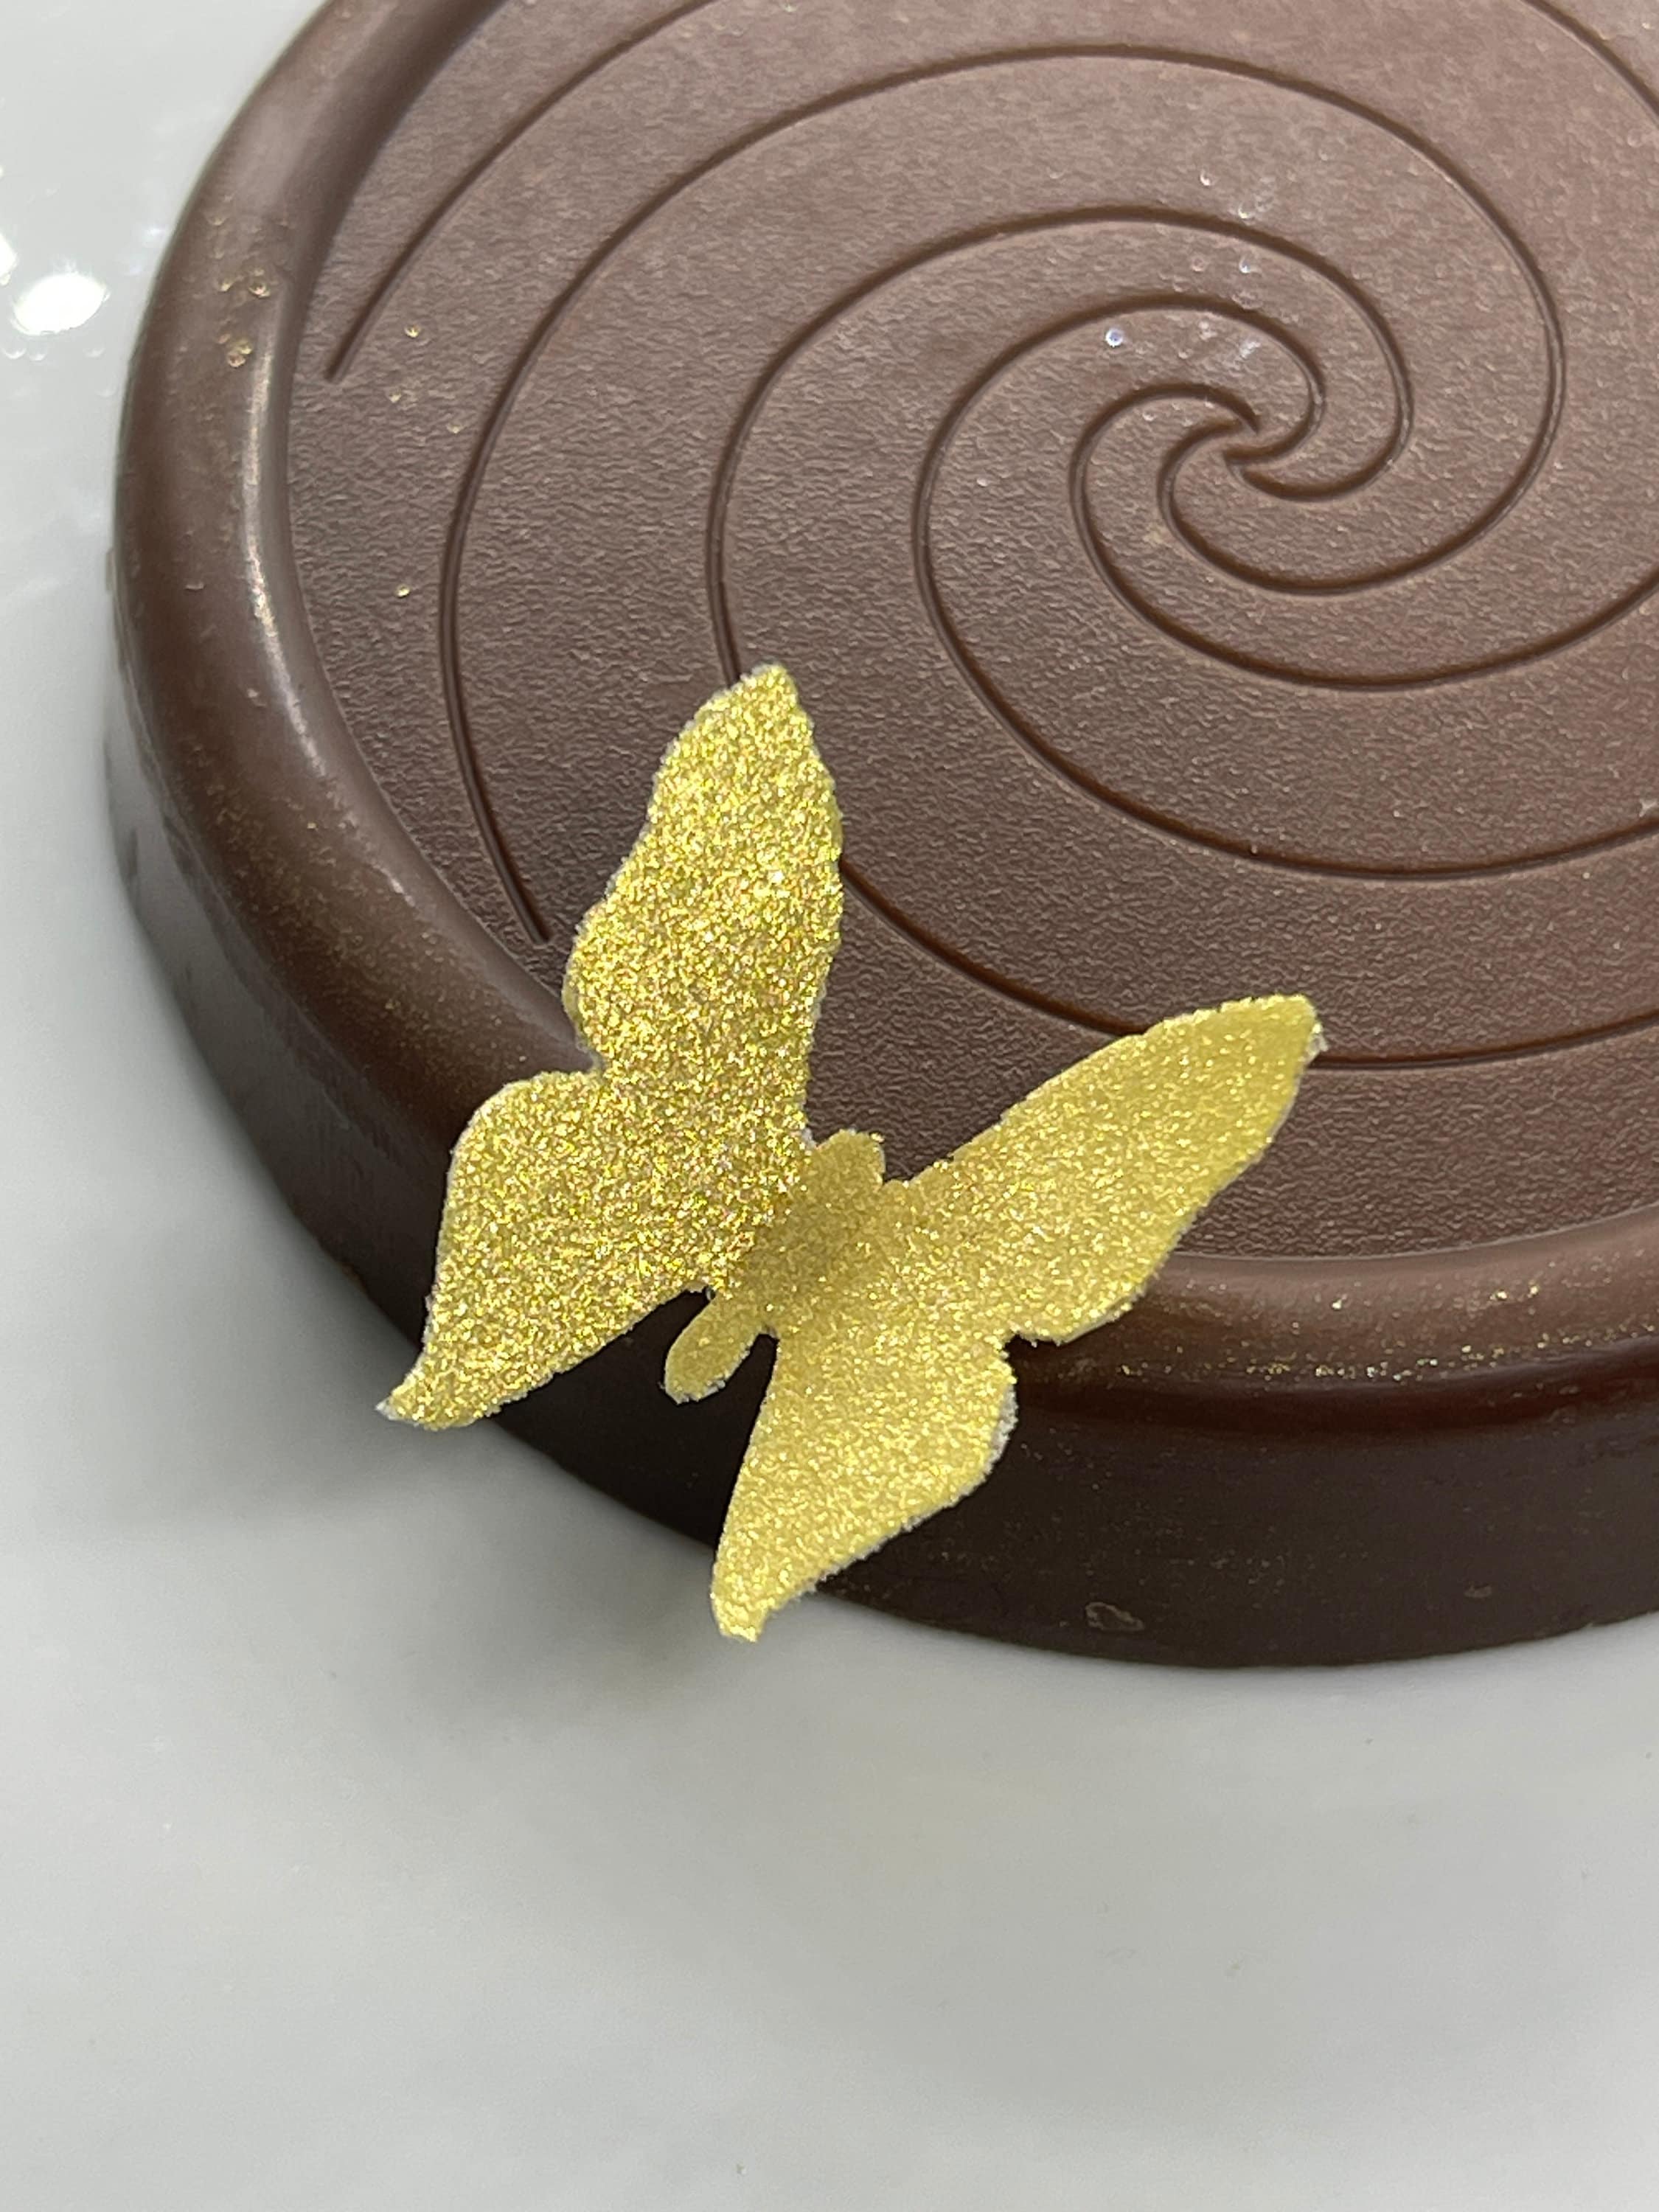 24 EDIBLE GOLD BUTTERFLIES BIRTHDAY CAKE CUP CAKE BABY SHOWER WEDDING  ENGAGEMENT